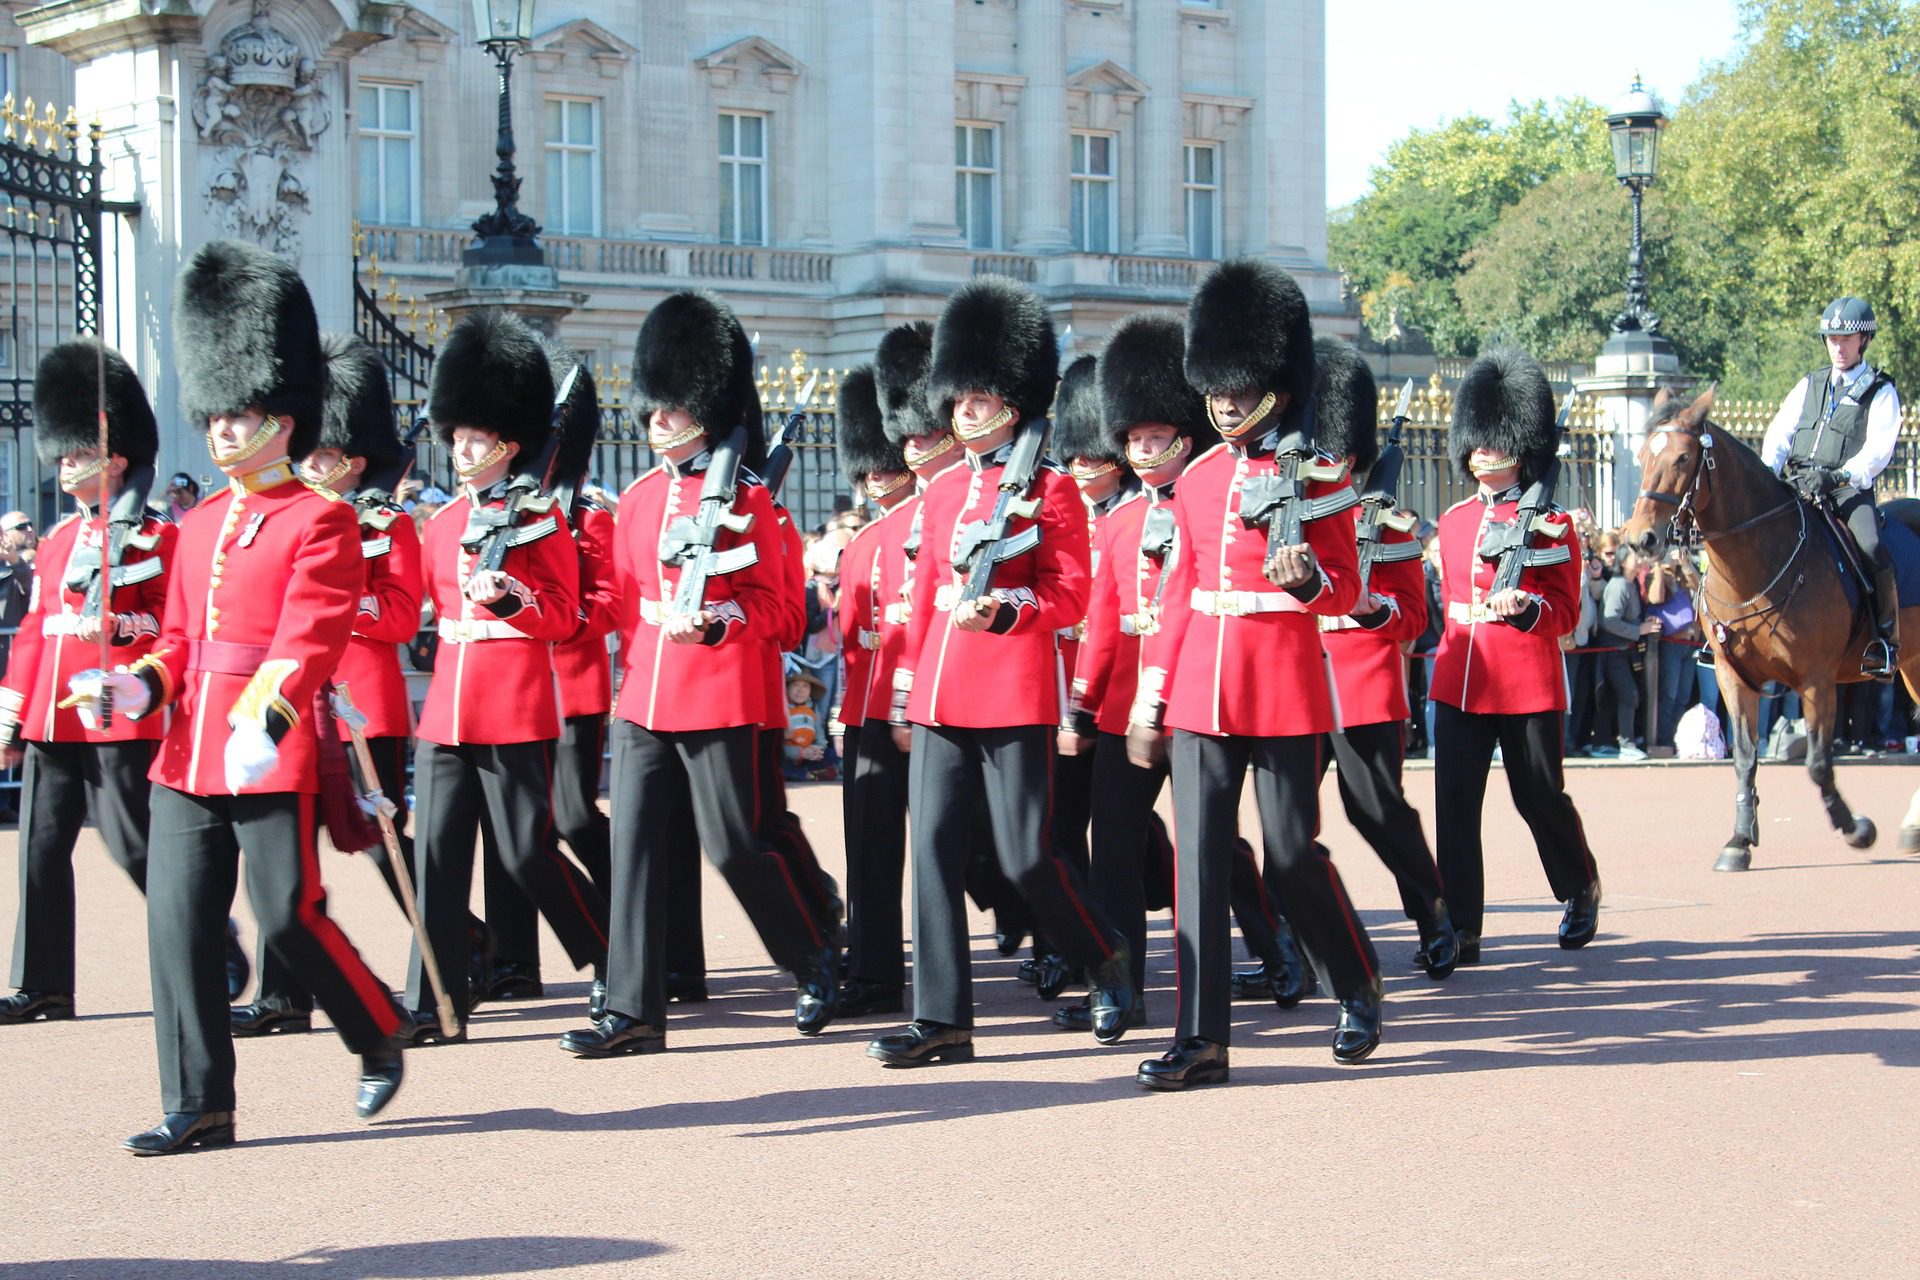 Changing of the Guard at Buckingham Palace, London